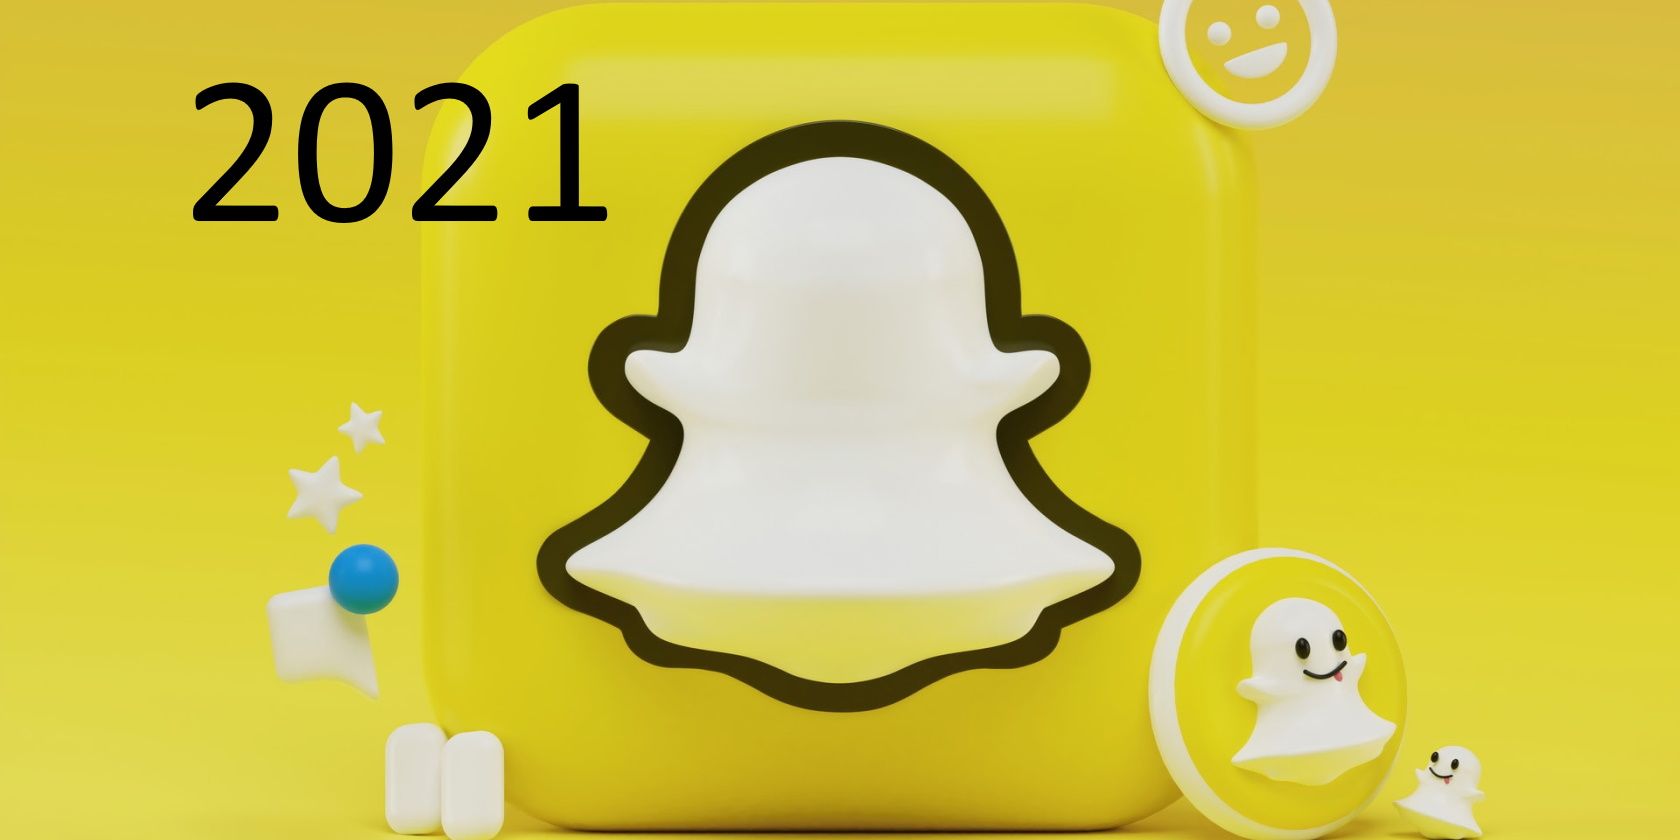 Snapchat 2021 in Review